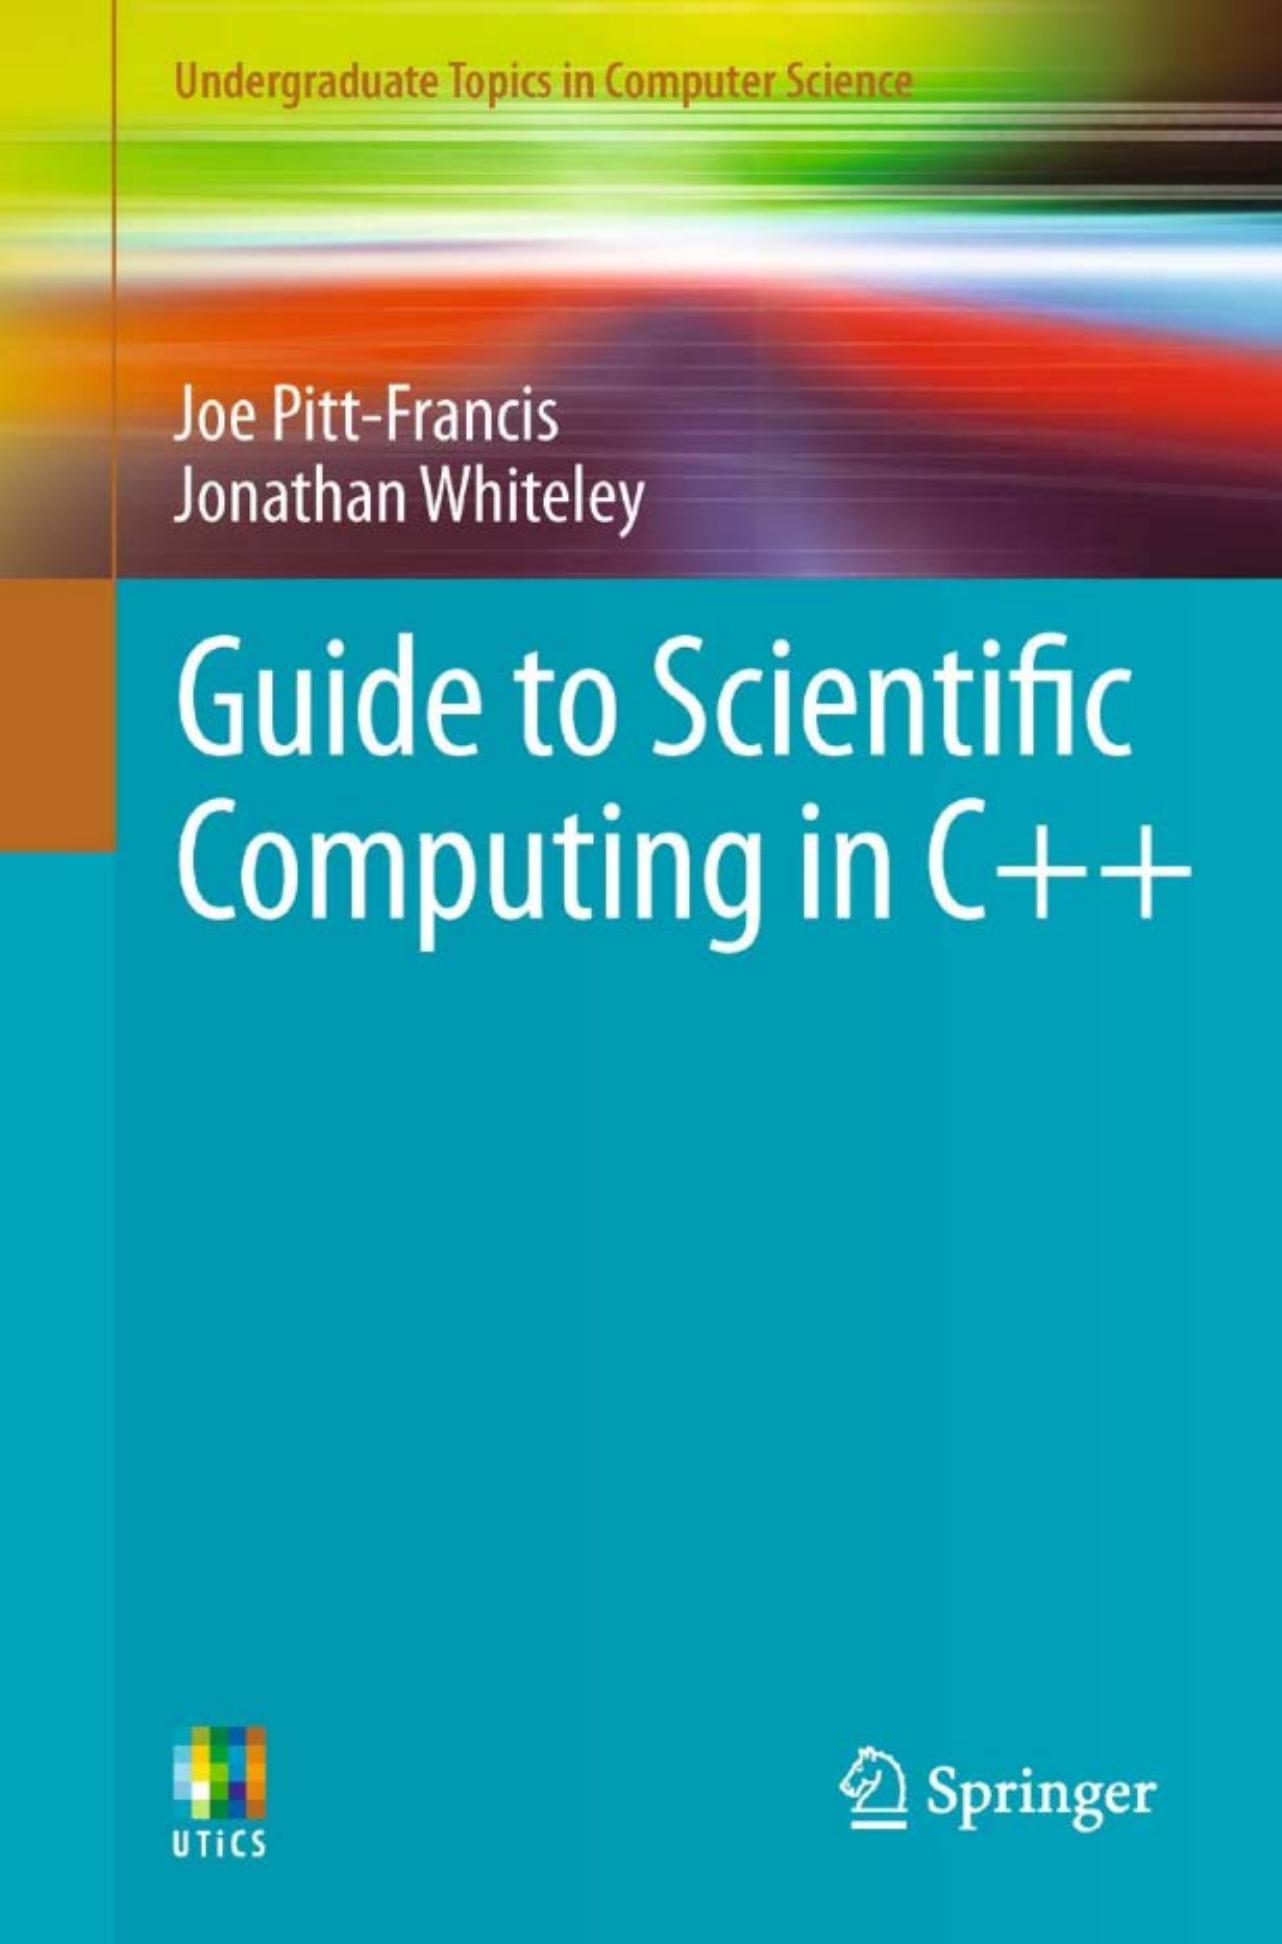 Guide to Scientific Computing in C